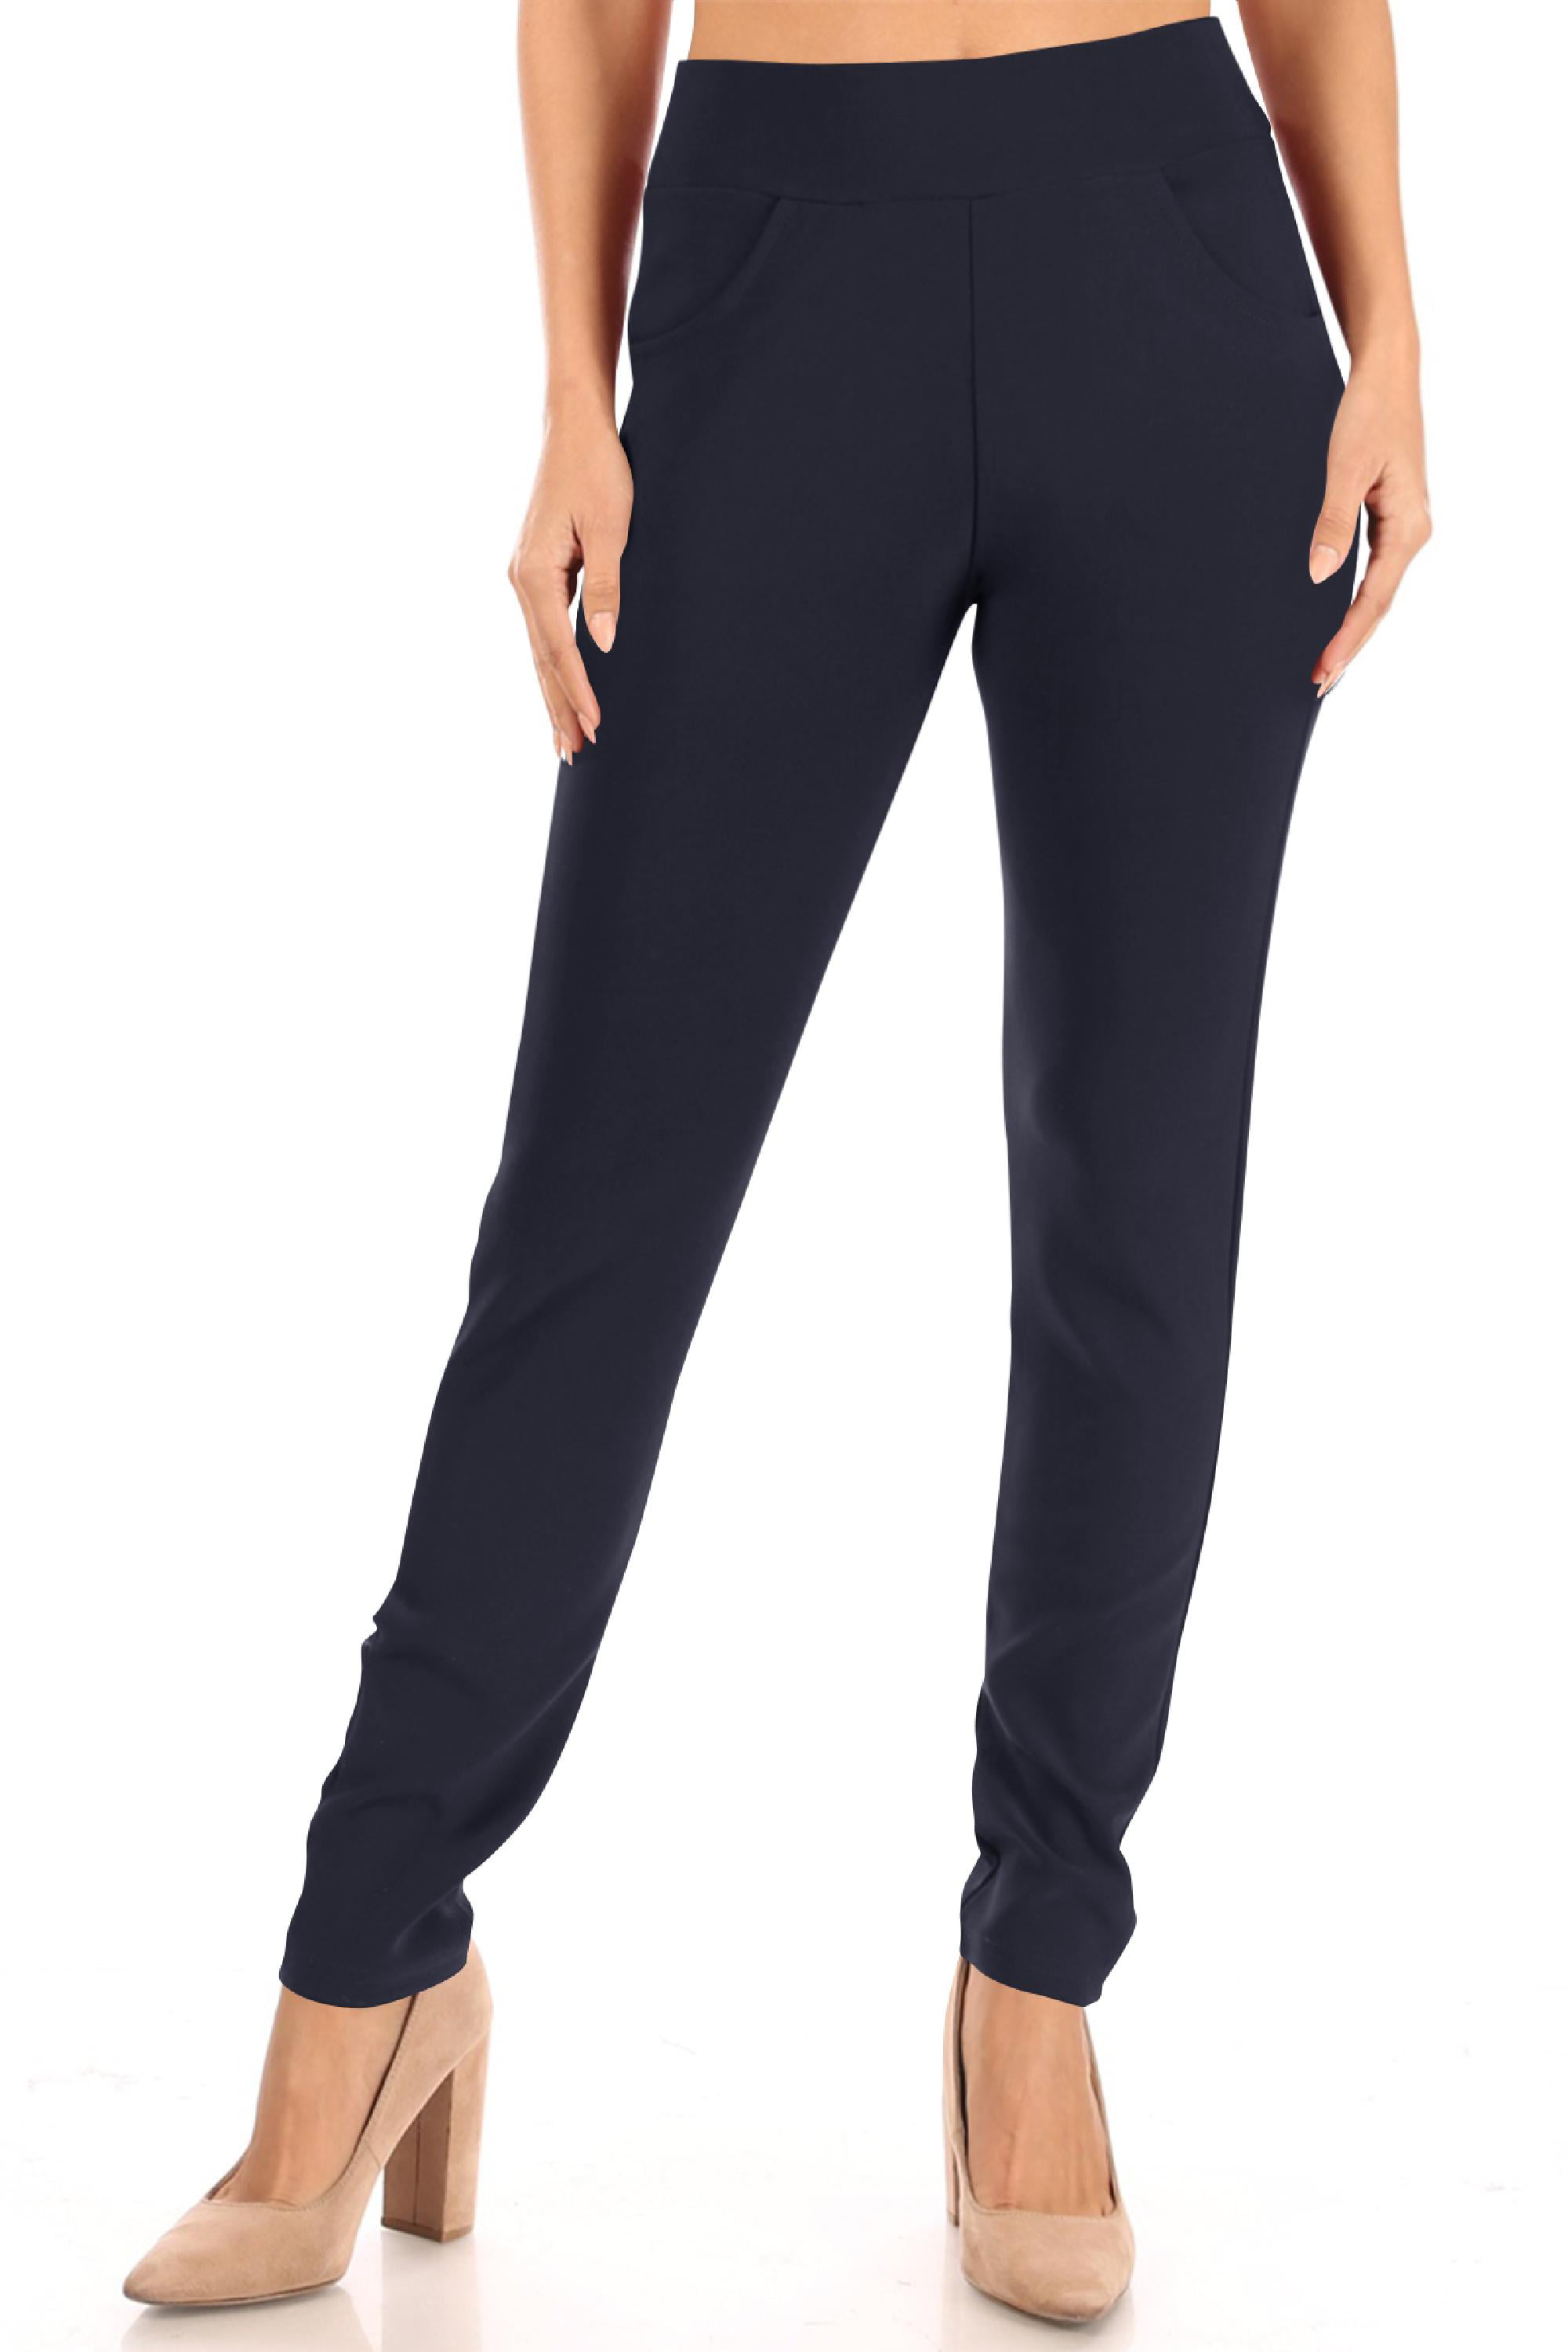 Women's Casual Solid Pull On Slim Stretch Pants with Pockets - Walmart.com